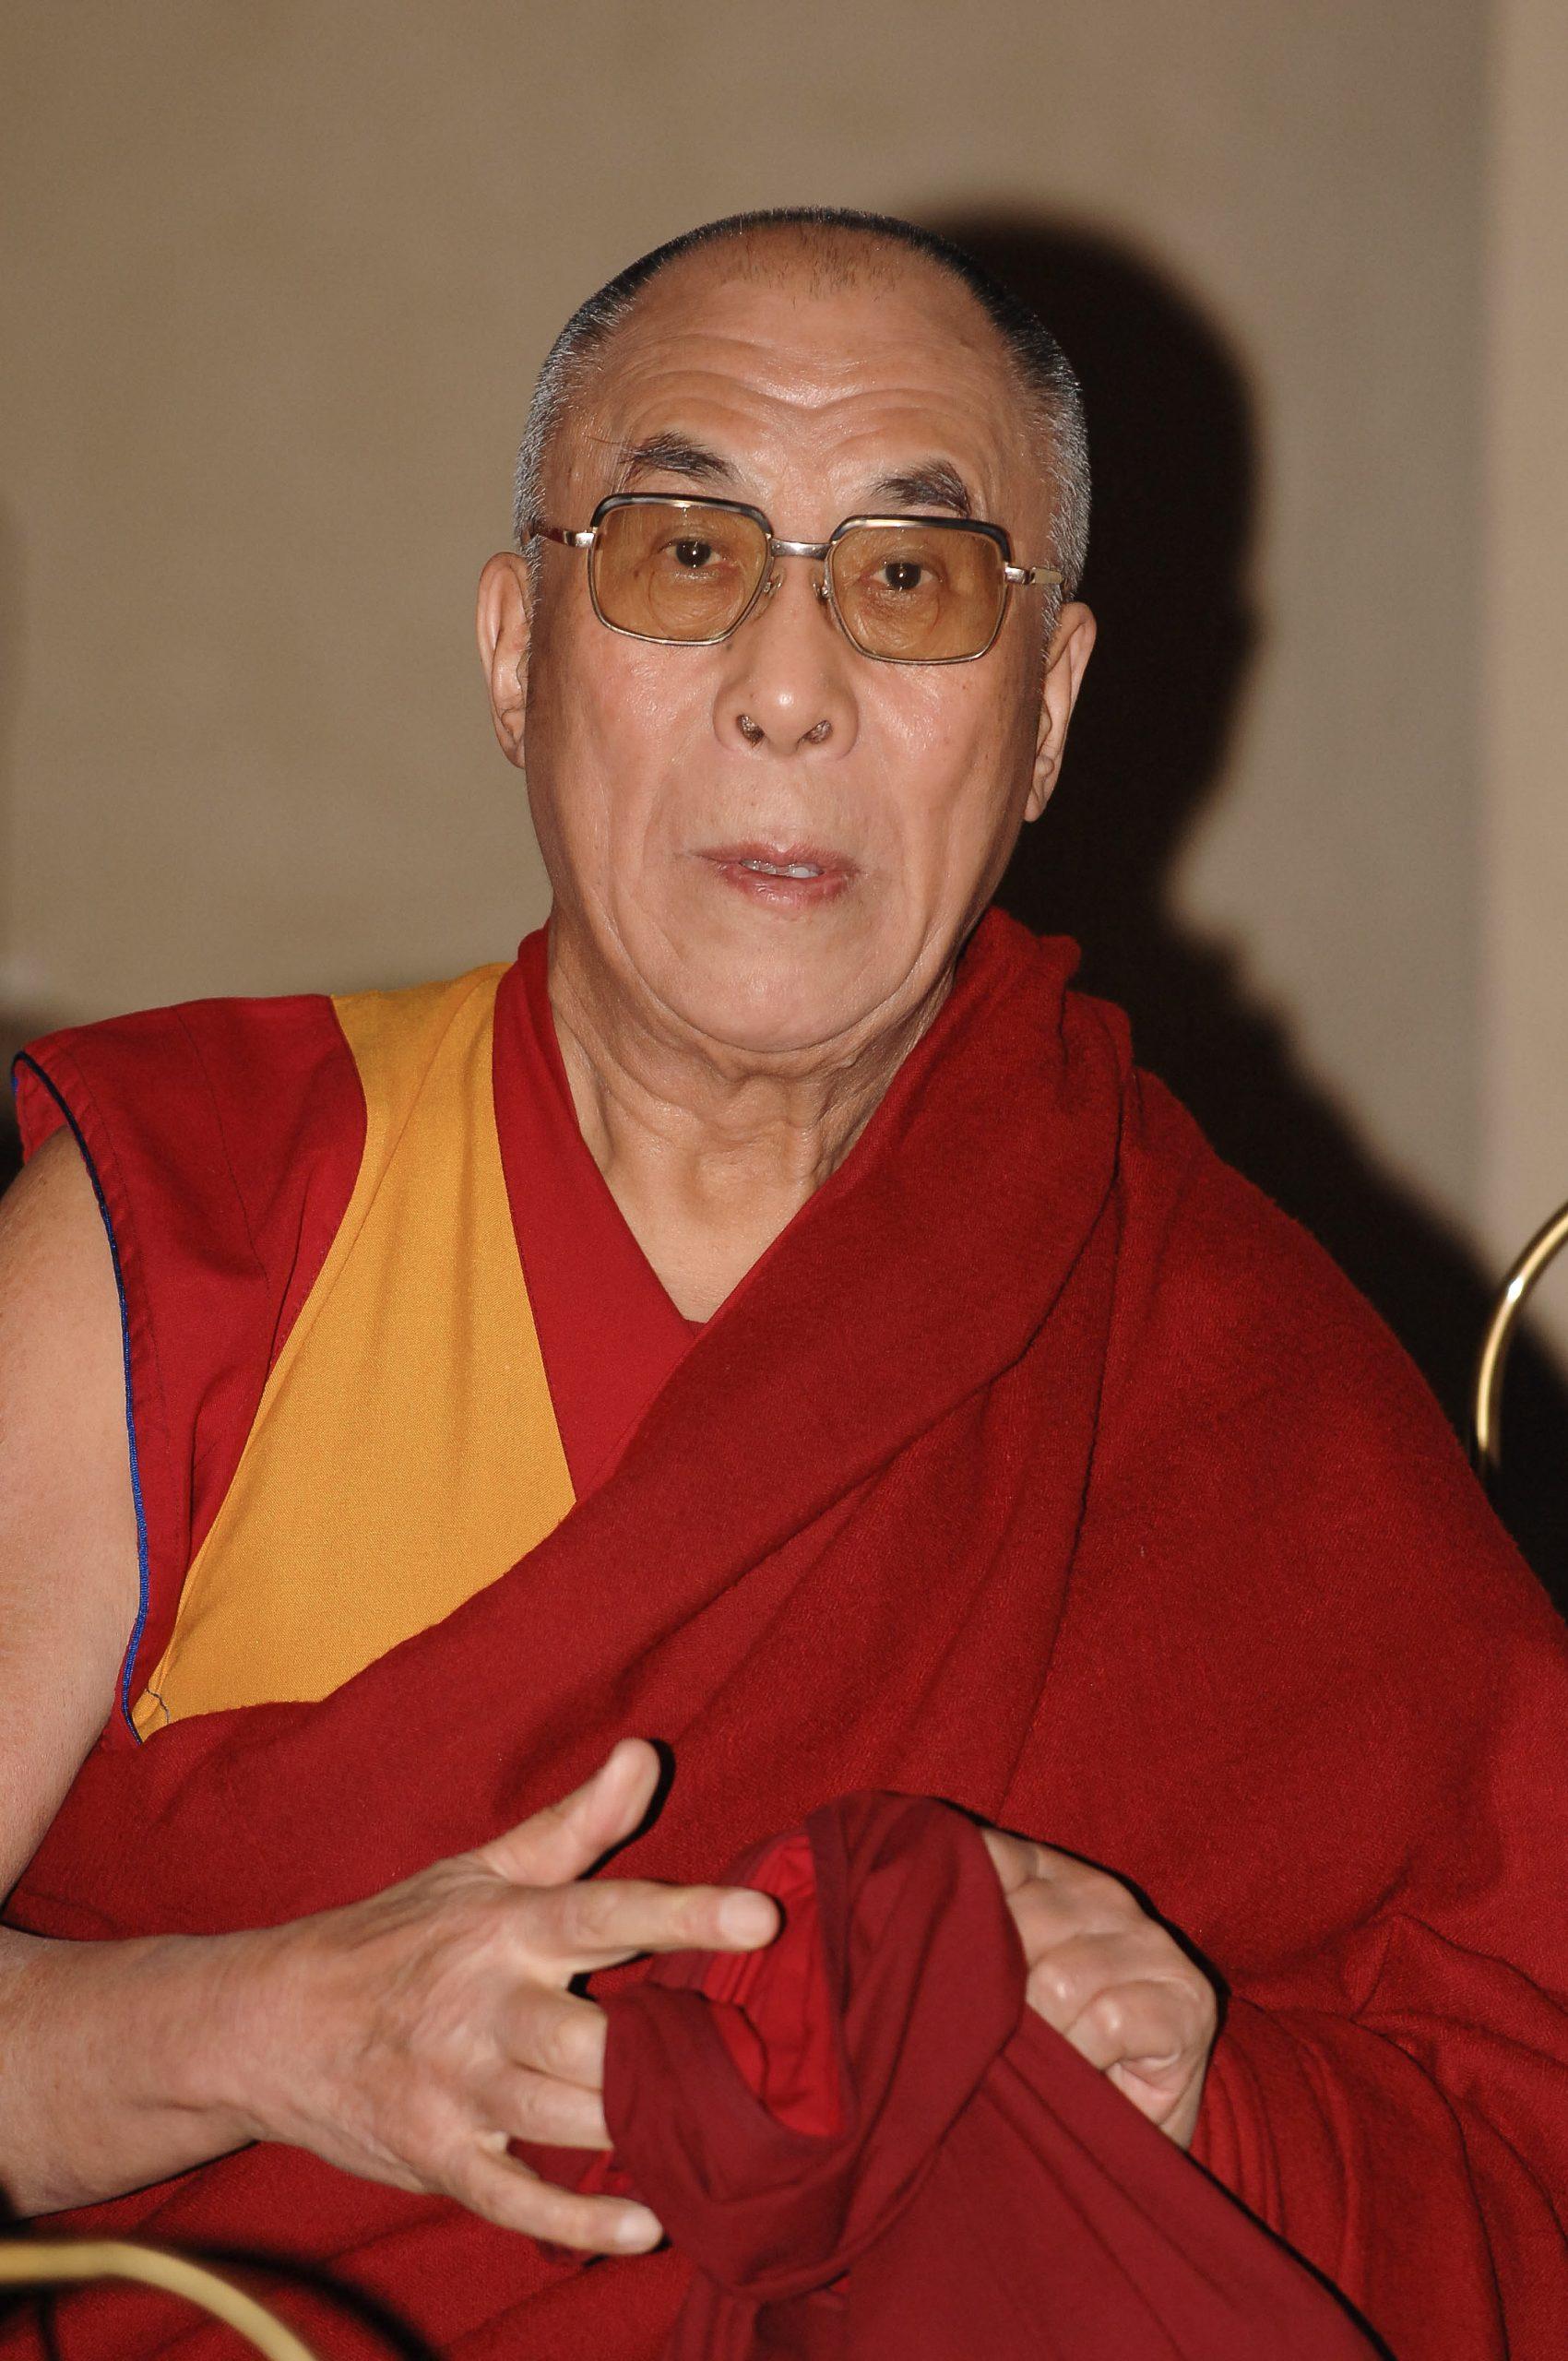 The Dalai Lama at Eighth world summit of nobel prize for peace at the Campidoglio in Rome